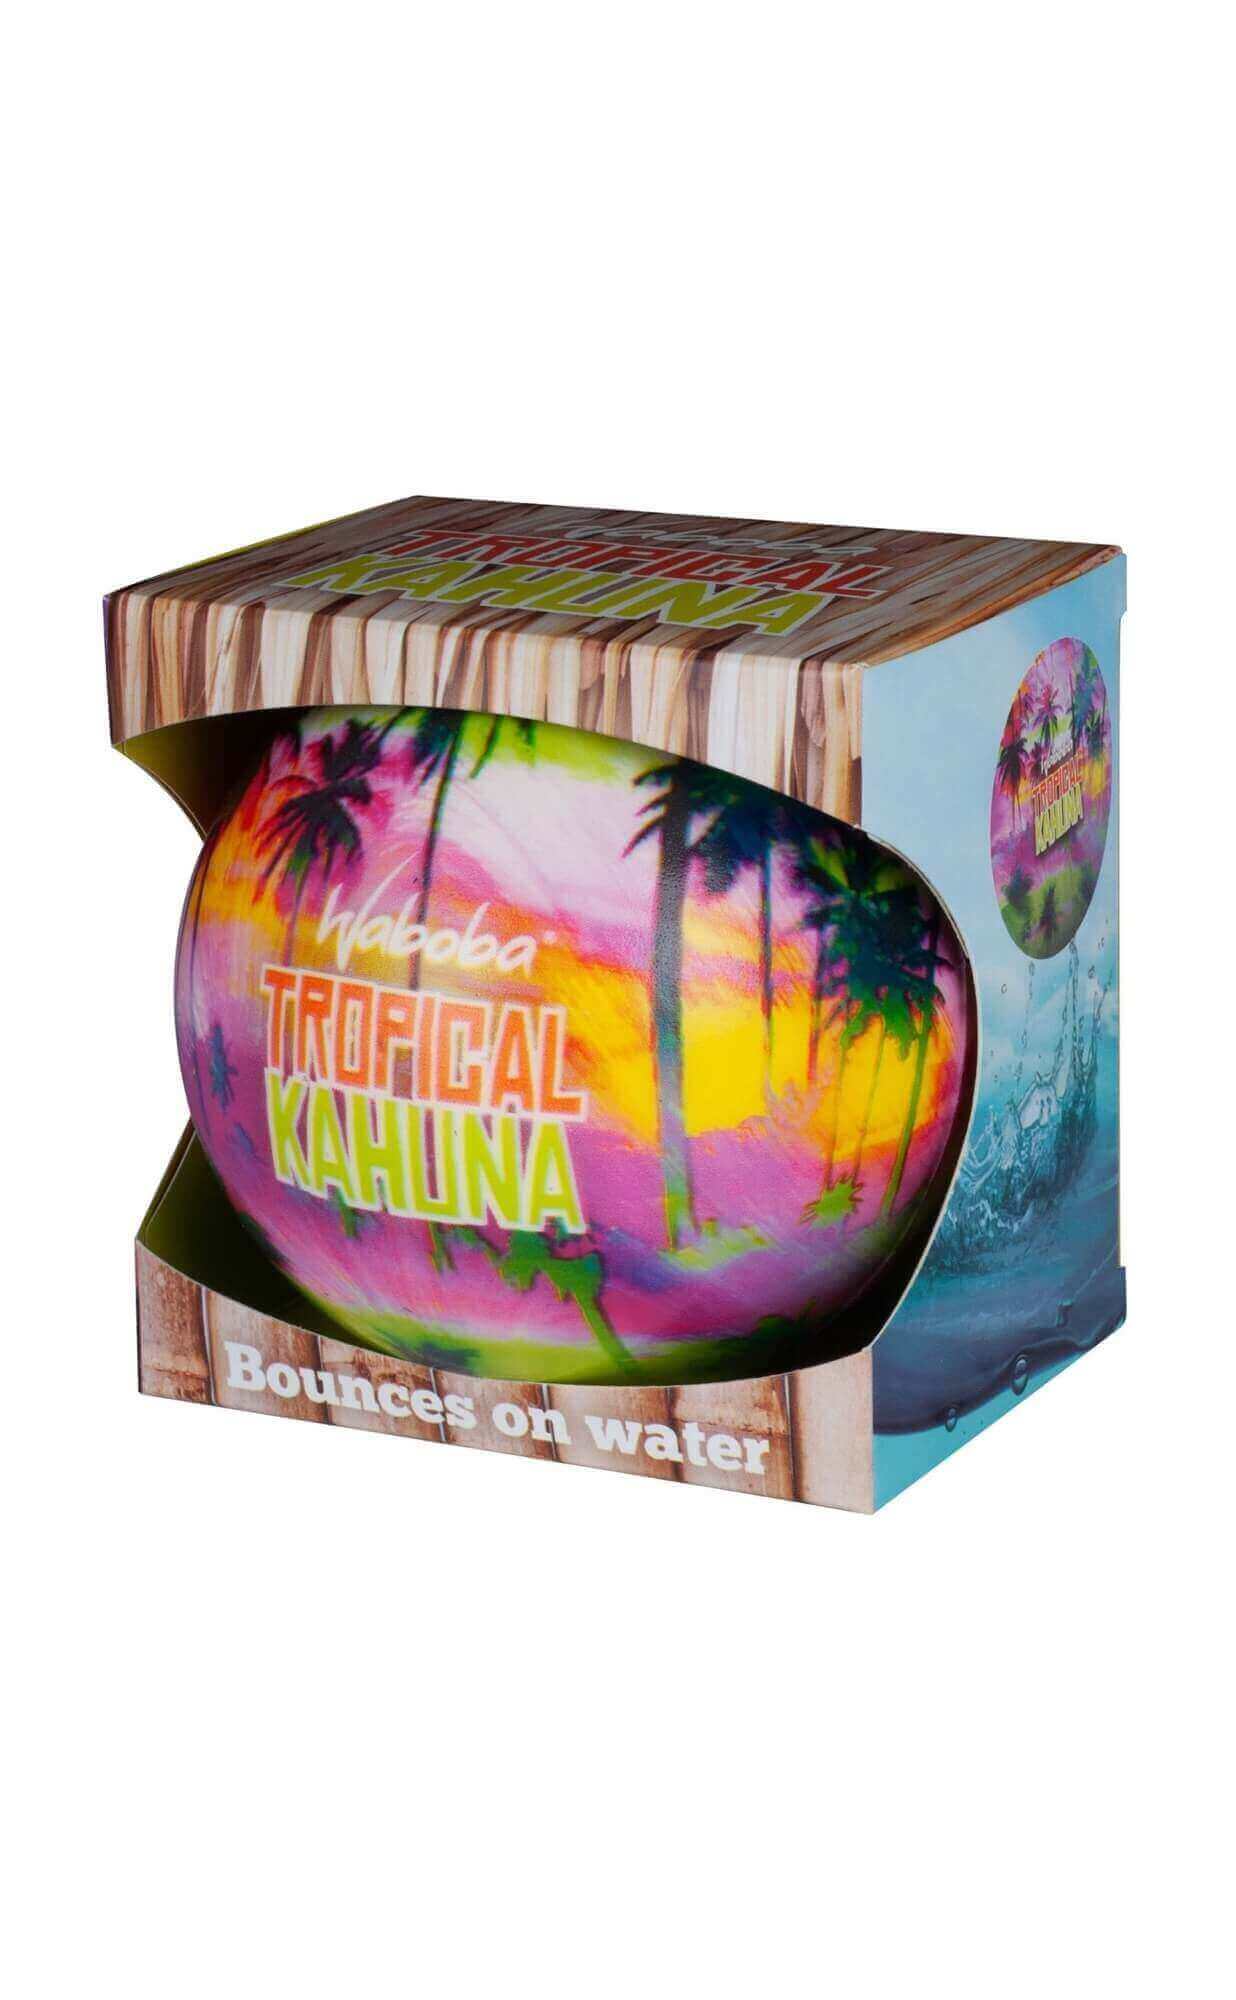 TROPICAL KAHUNA IN 2 TIER ASSORTED DESIGNS_TEAM_STUBBY CLUB